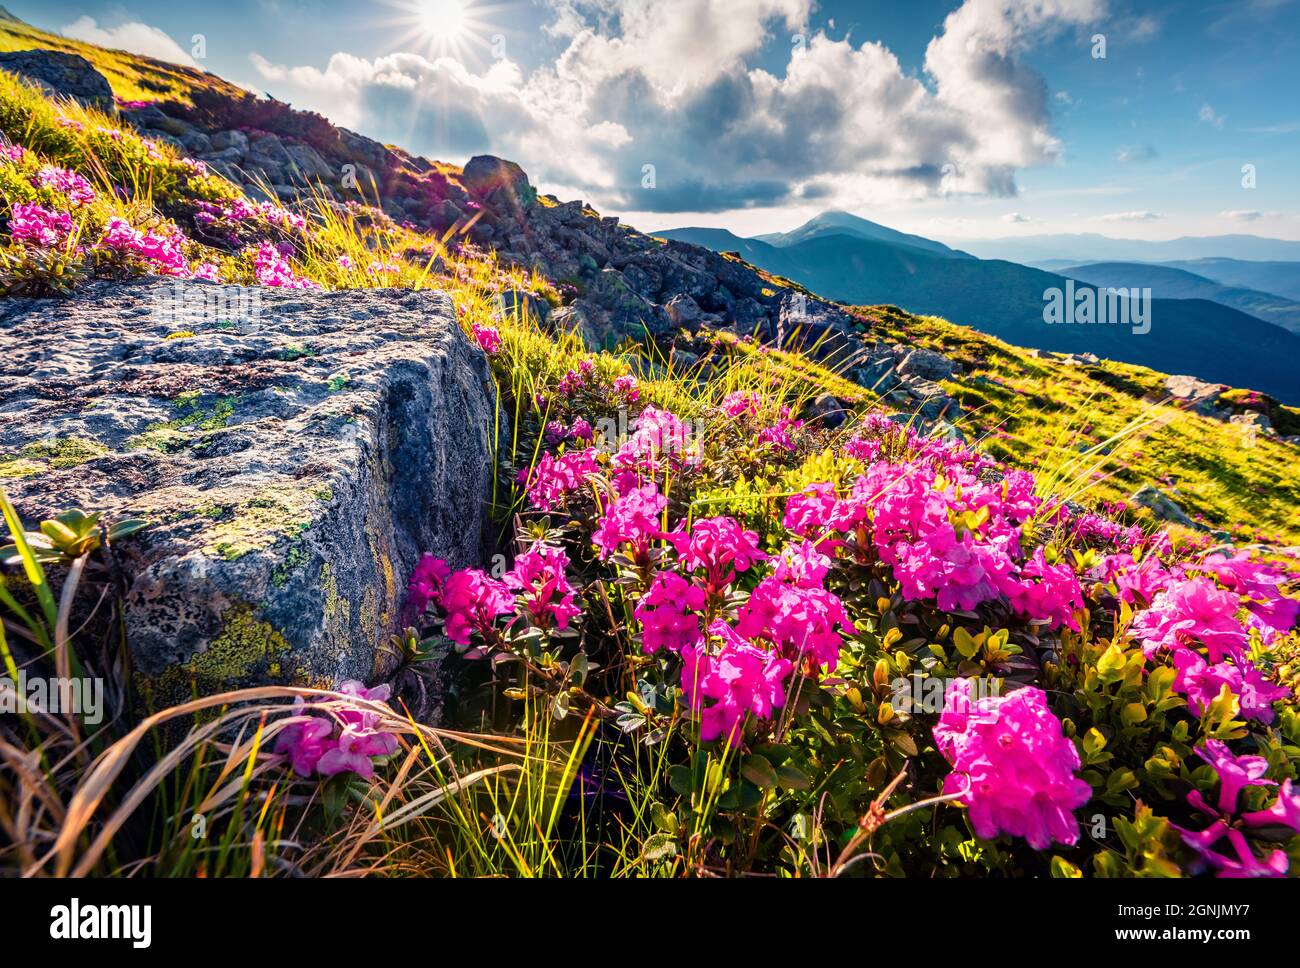 Majestic summer view of Carpathian mountains with highest peak Hoverla on background, Ukraine. Blooming pink rhododendron flowers on Chornogora range. Stock Photo